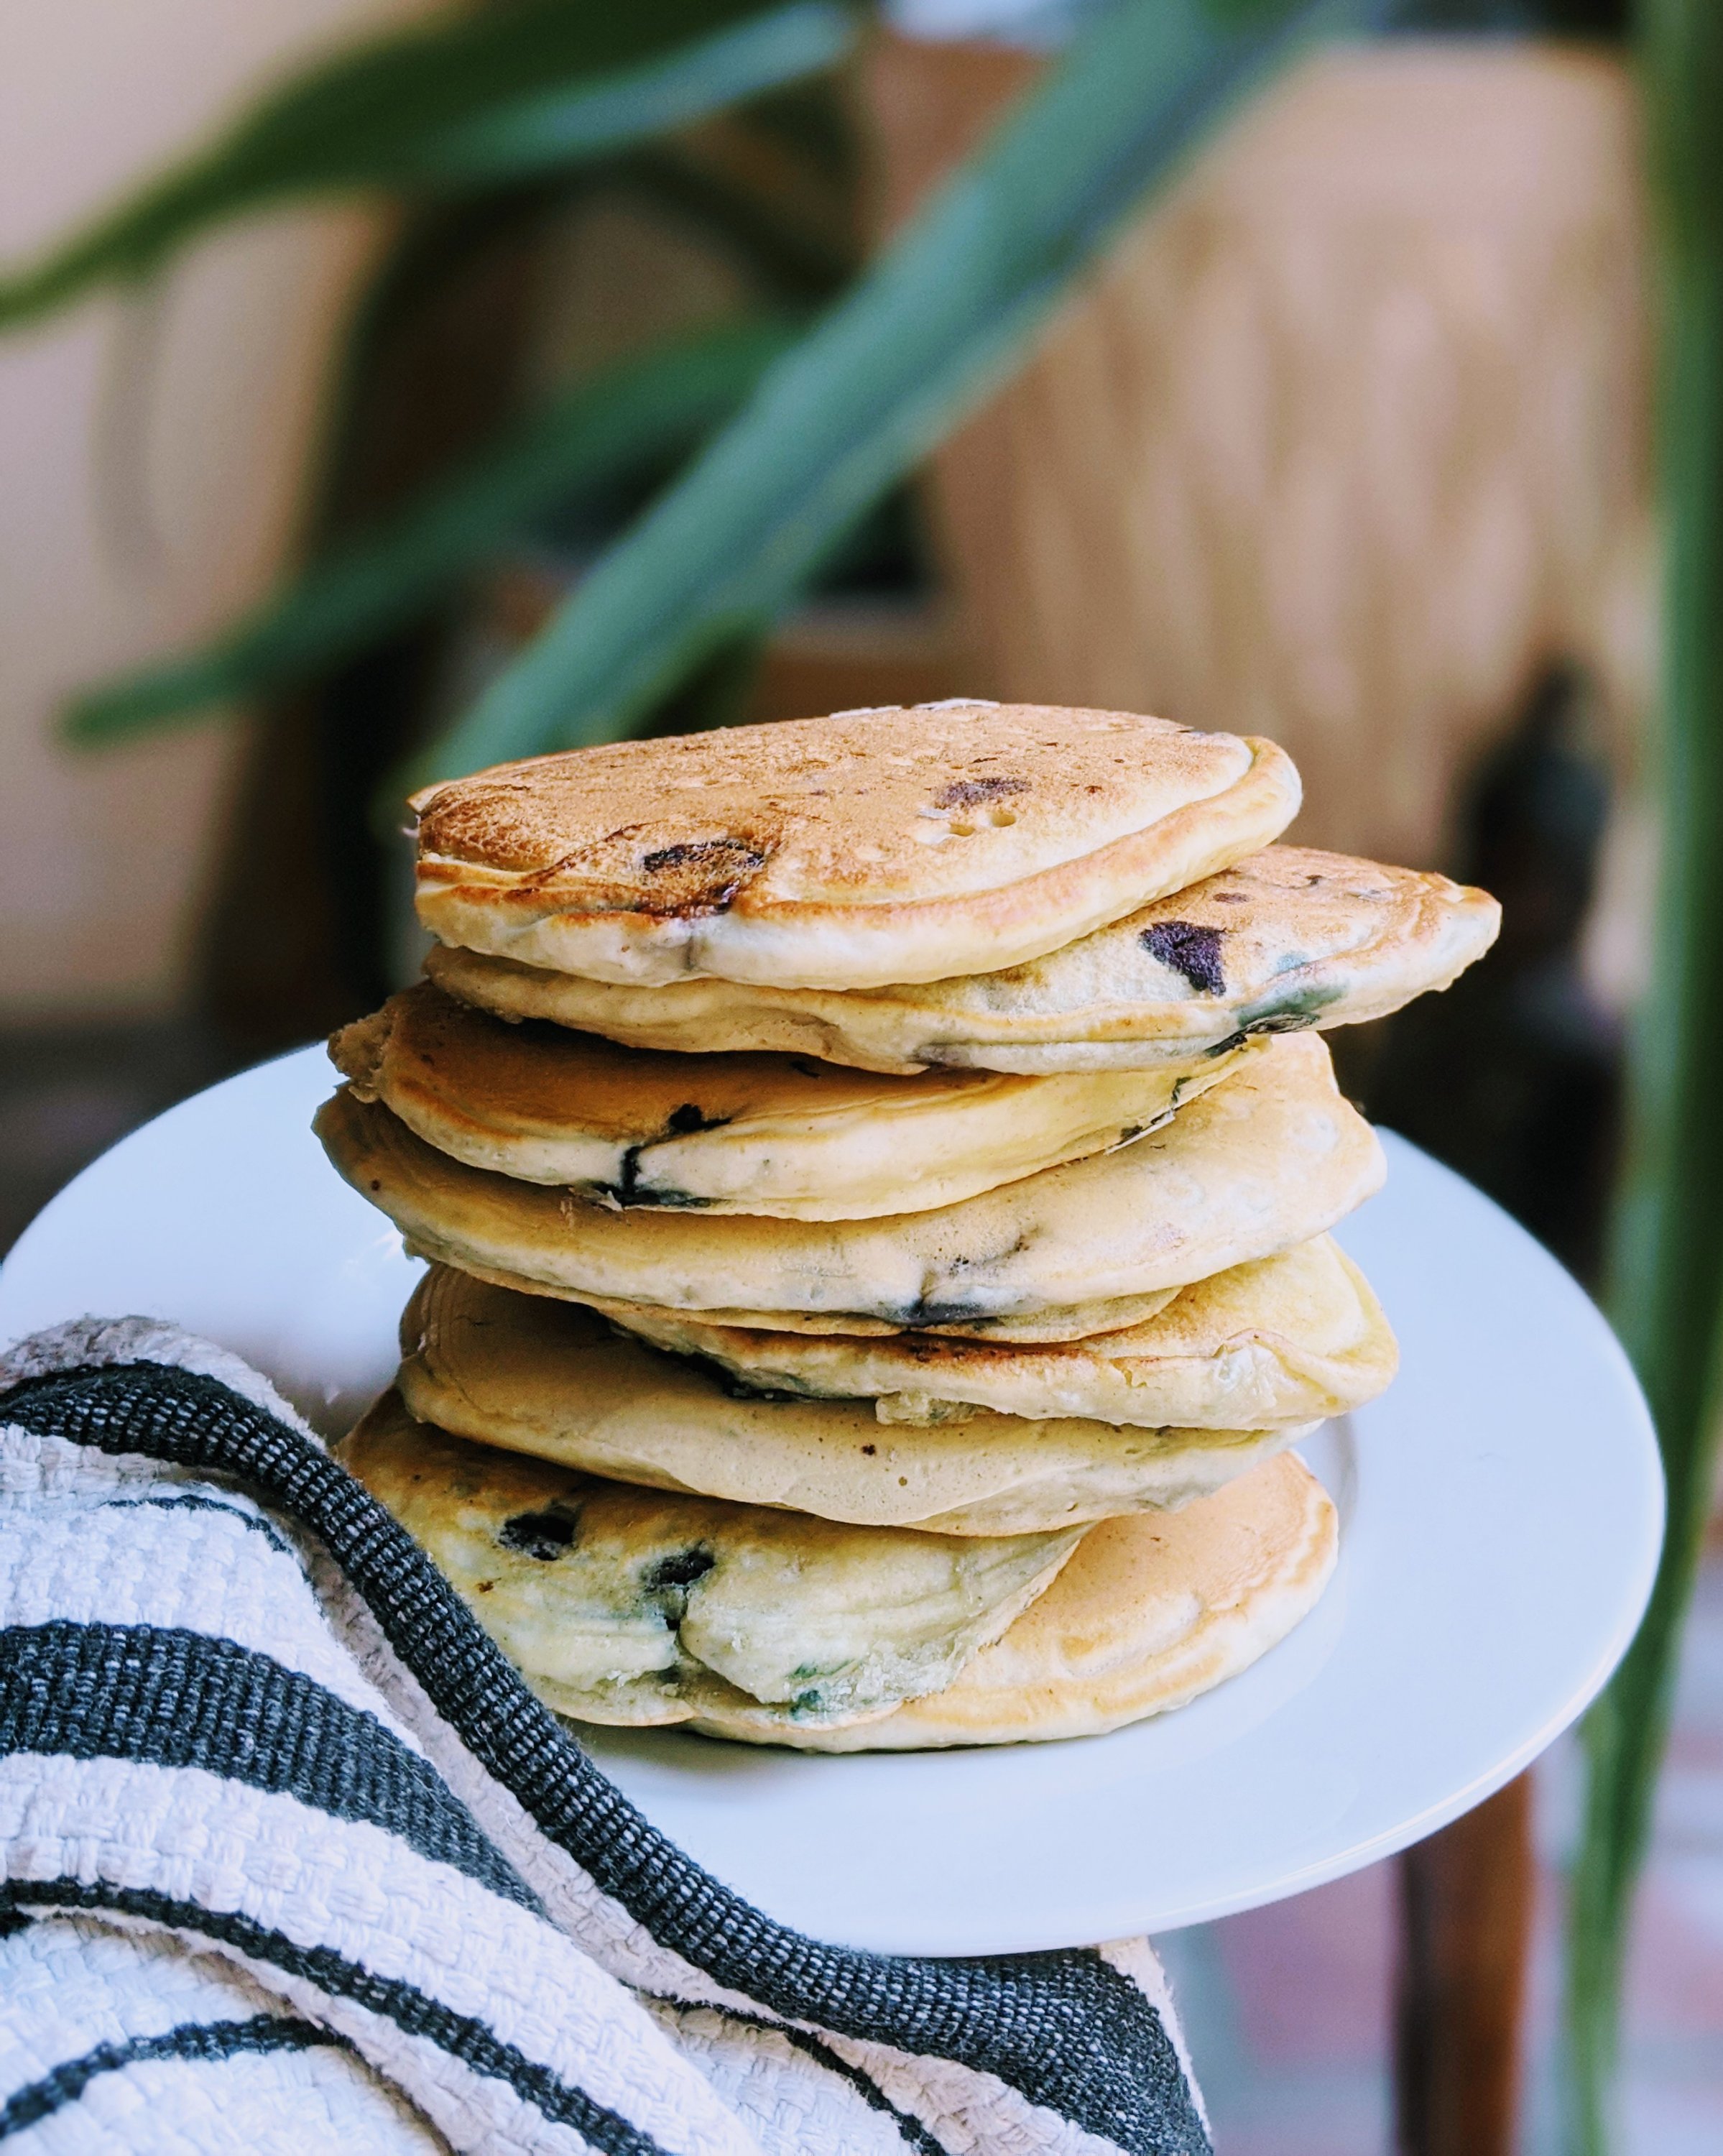 healthy blueberry pancakes with buttermilk or vegan version with almond milk or coconut milk from scratch breakfast recipes